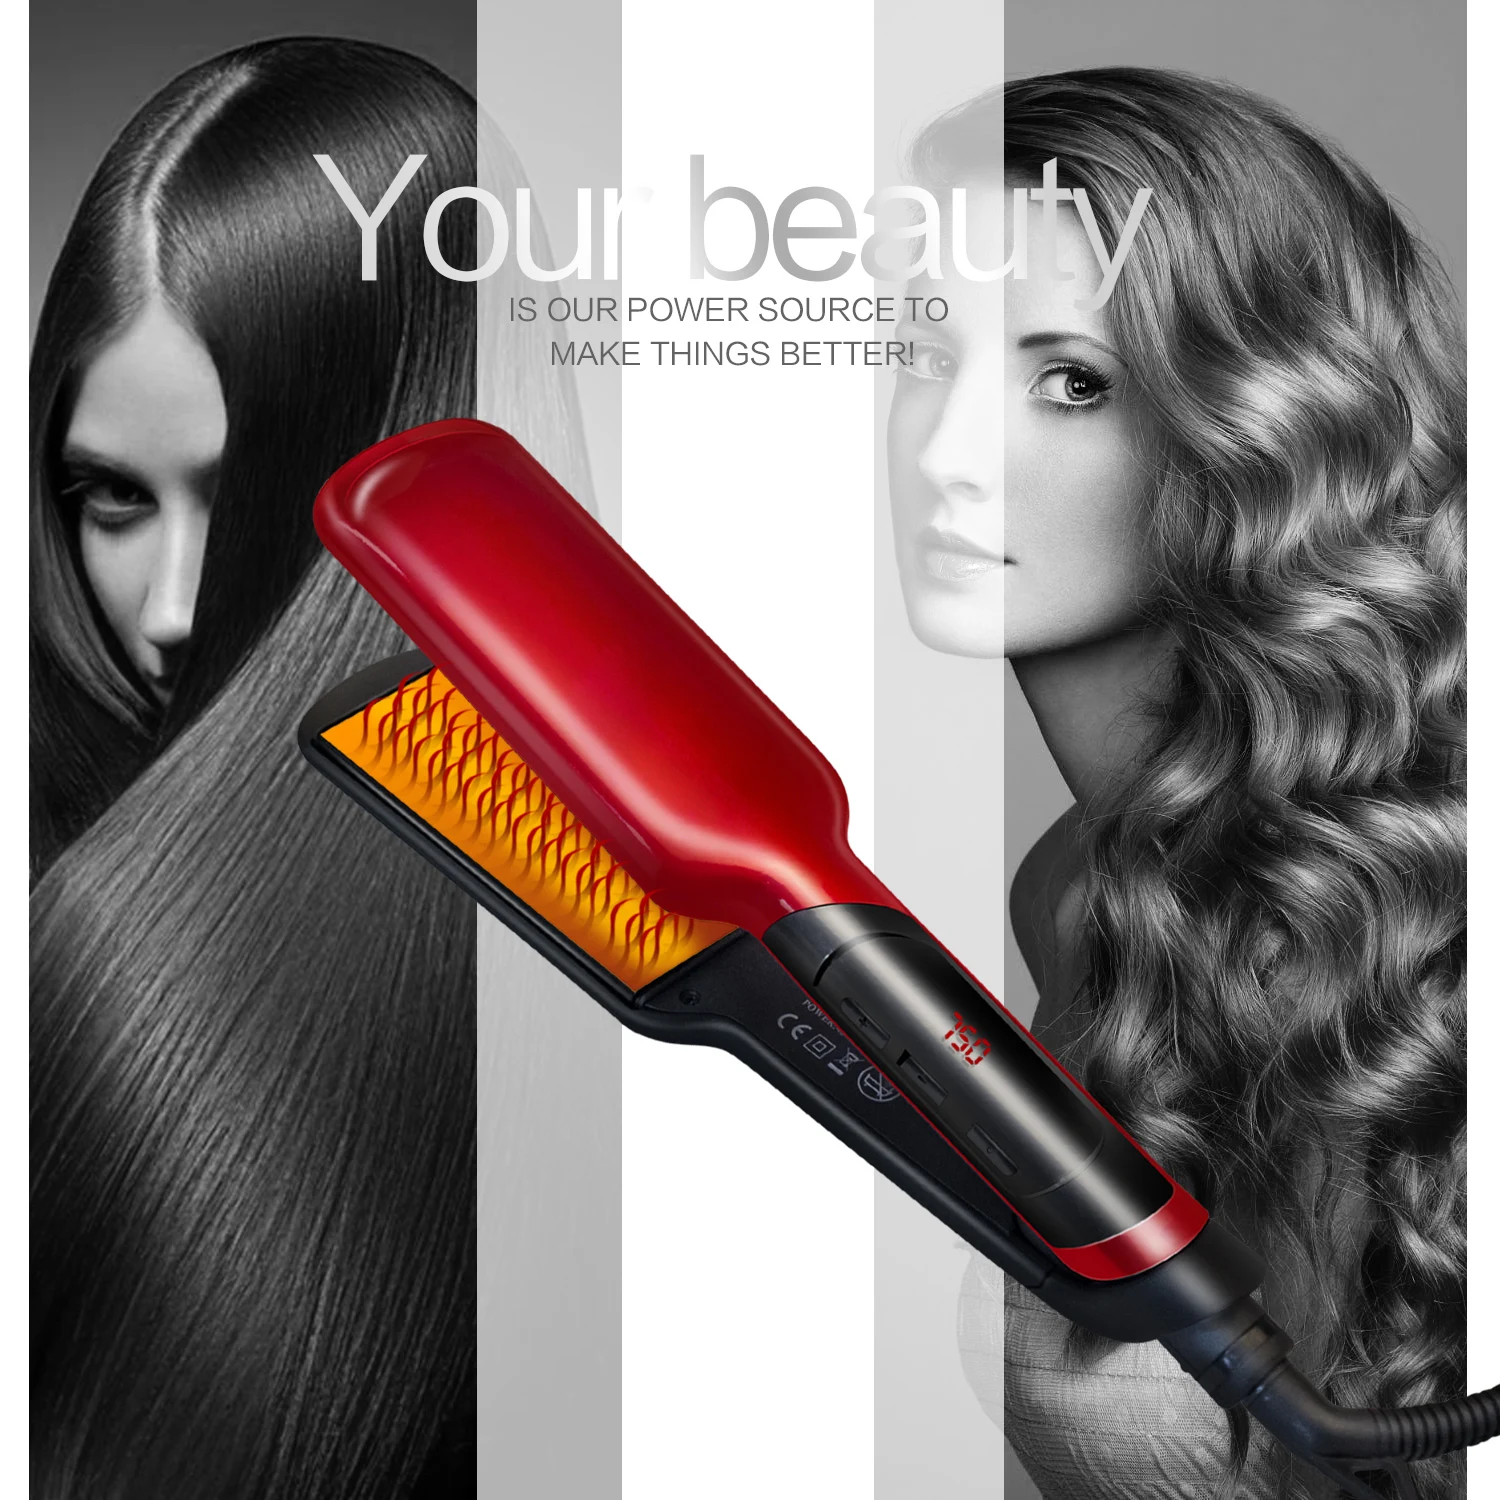 

Flat Iron Electric Hair Ceramic Coating 2 In 1 Straightener Heat Curler Straightening Irons Styling Tool Curling Curls Styler